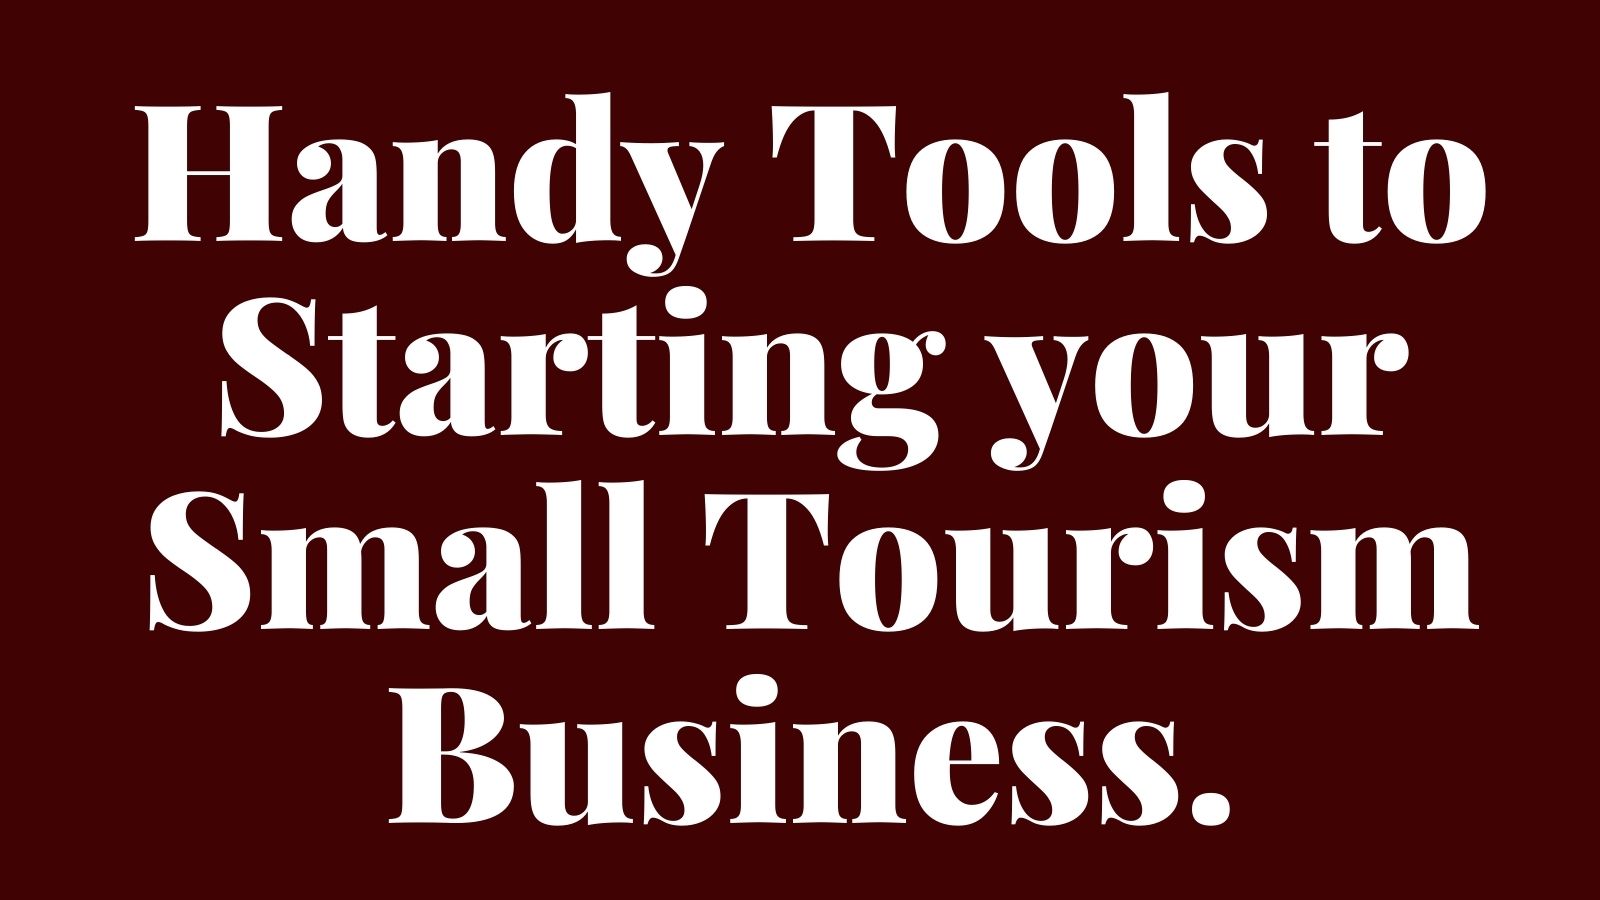 Starting A Small Tourism Business